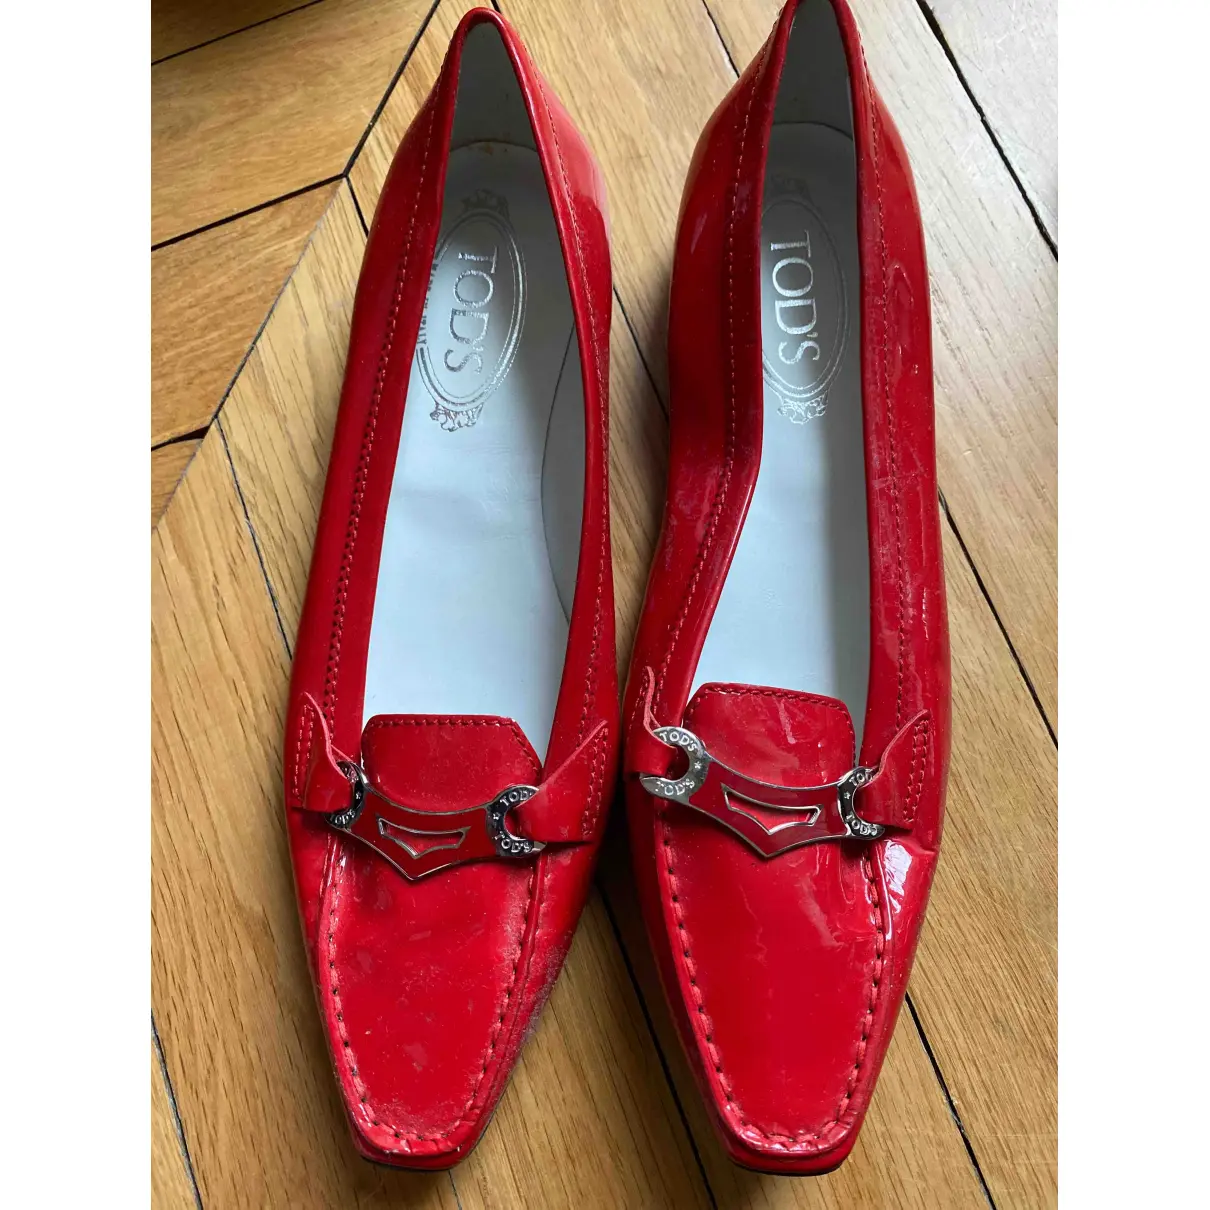 Buy Tod's Gommino patent leather flats online